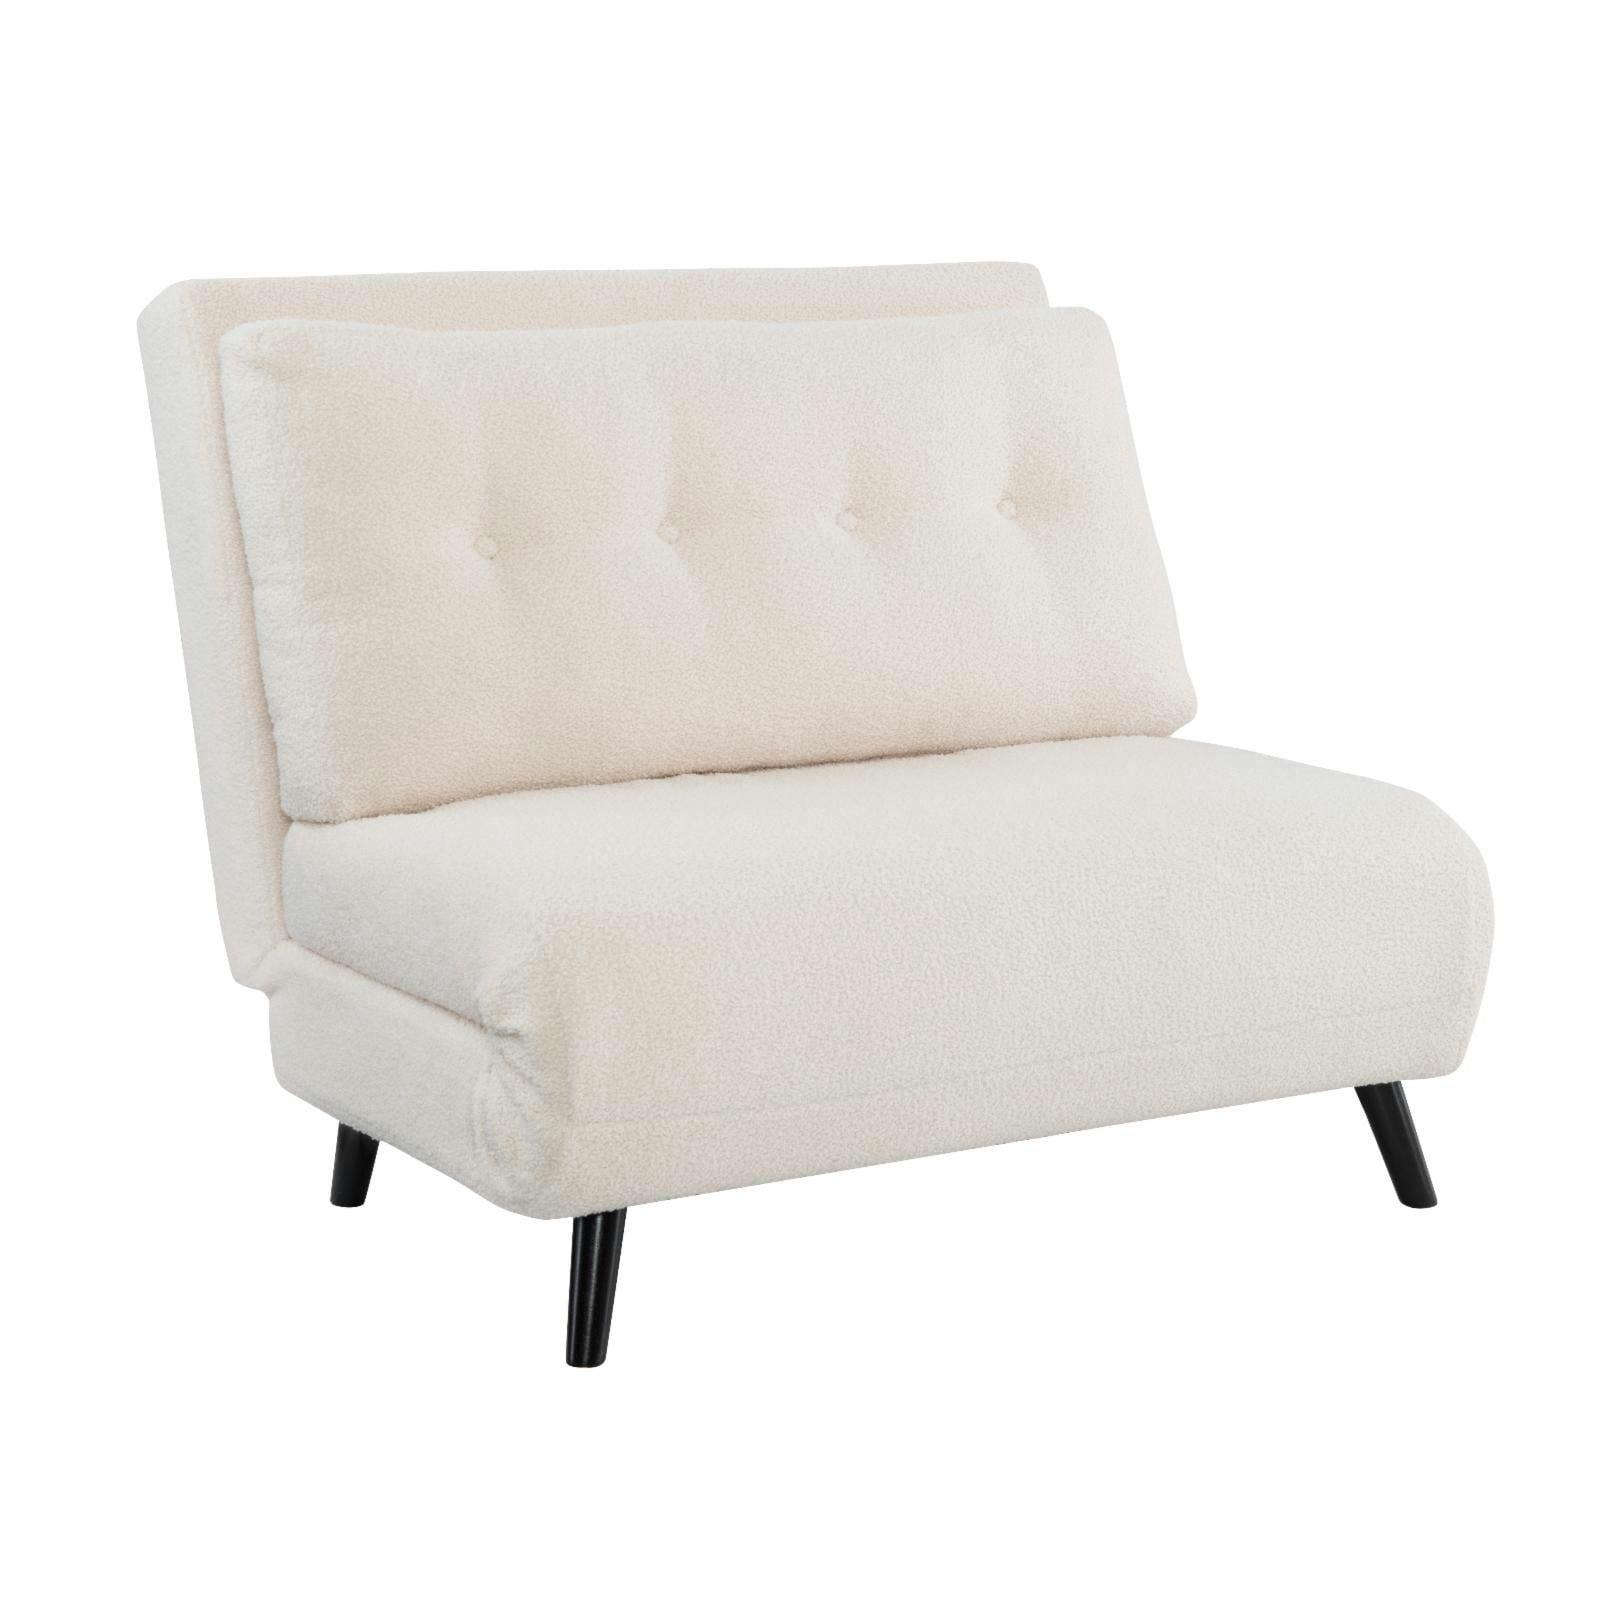 Esai White Sherpa Convertible Lounge Chair with Hairpin Legs